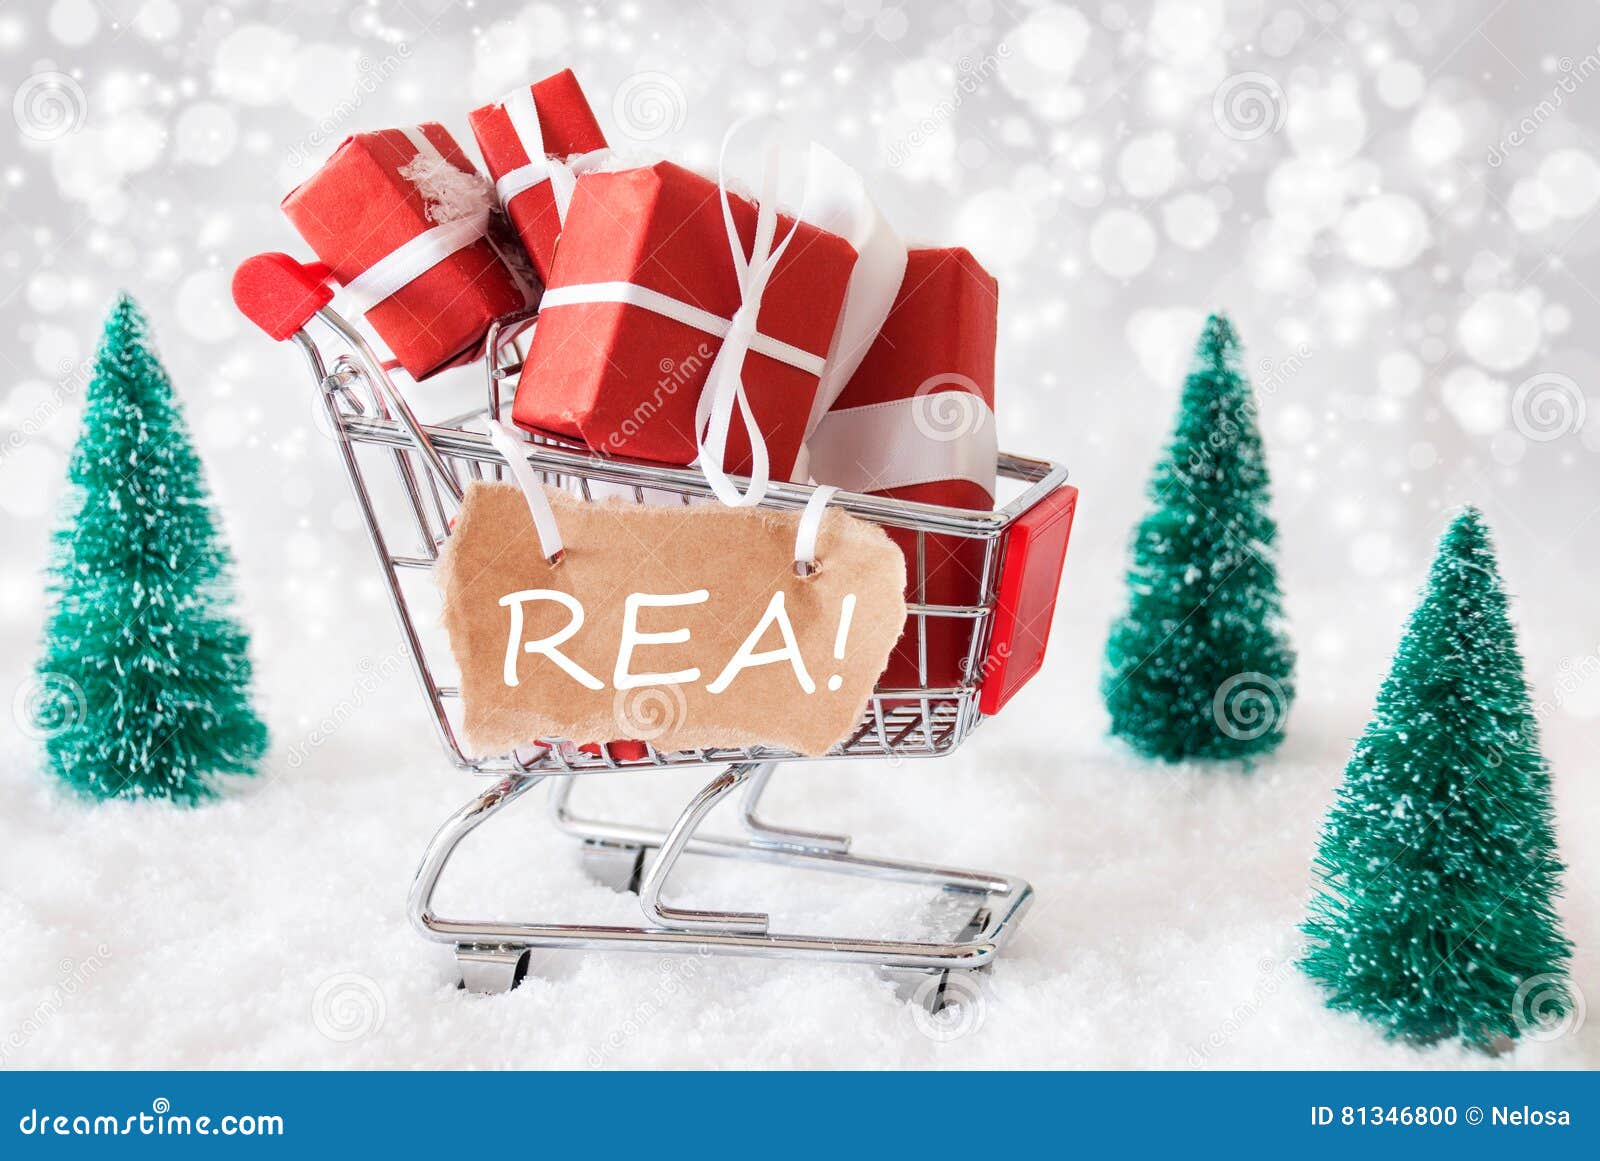 trolly with christmas gifts and snow, text rea